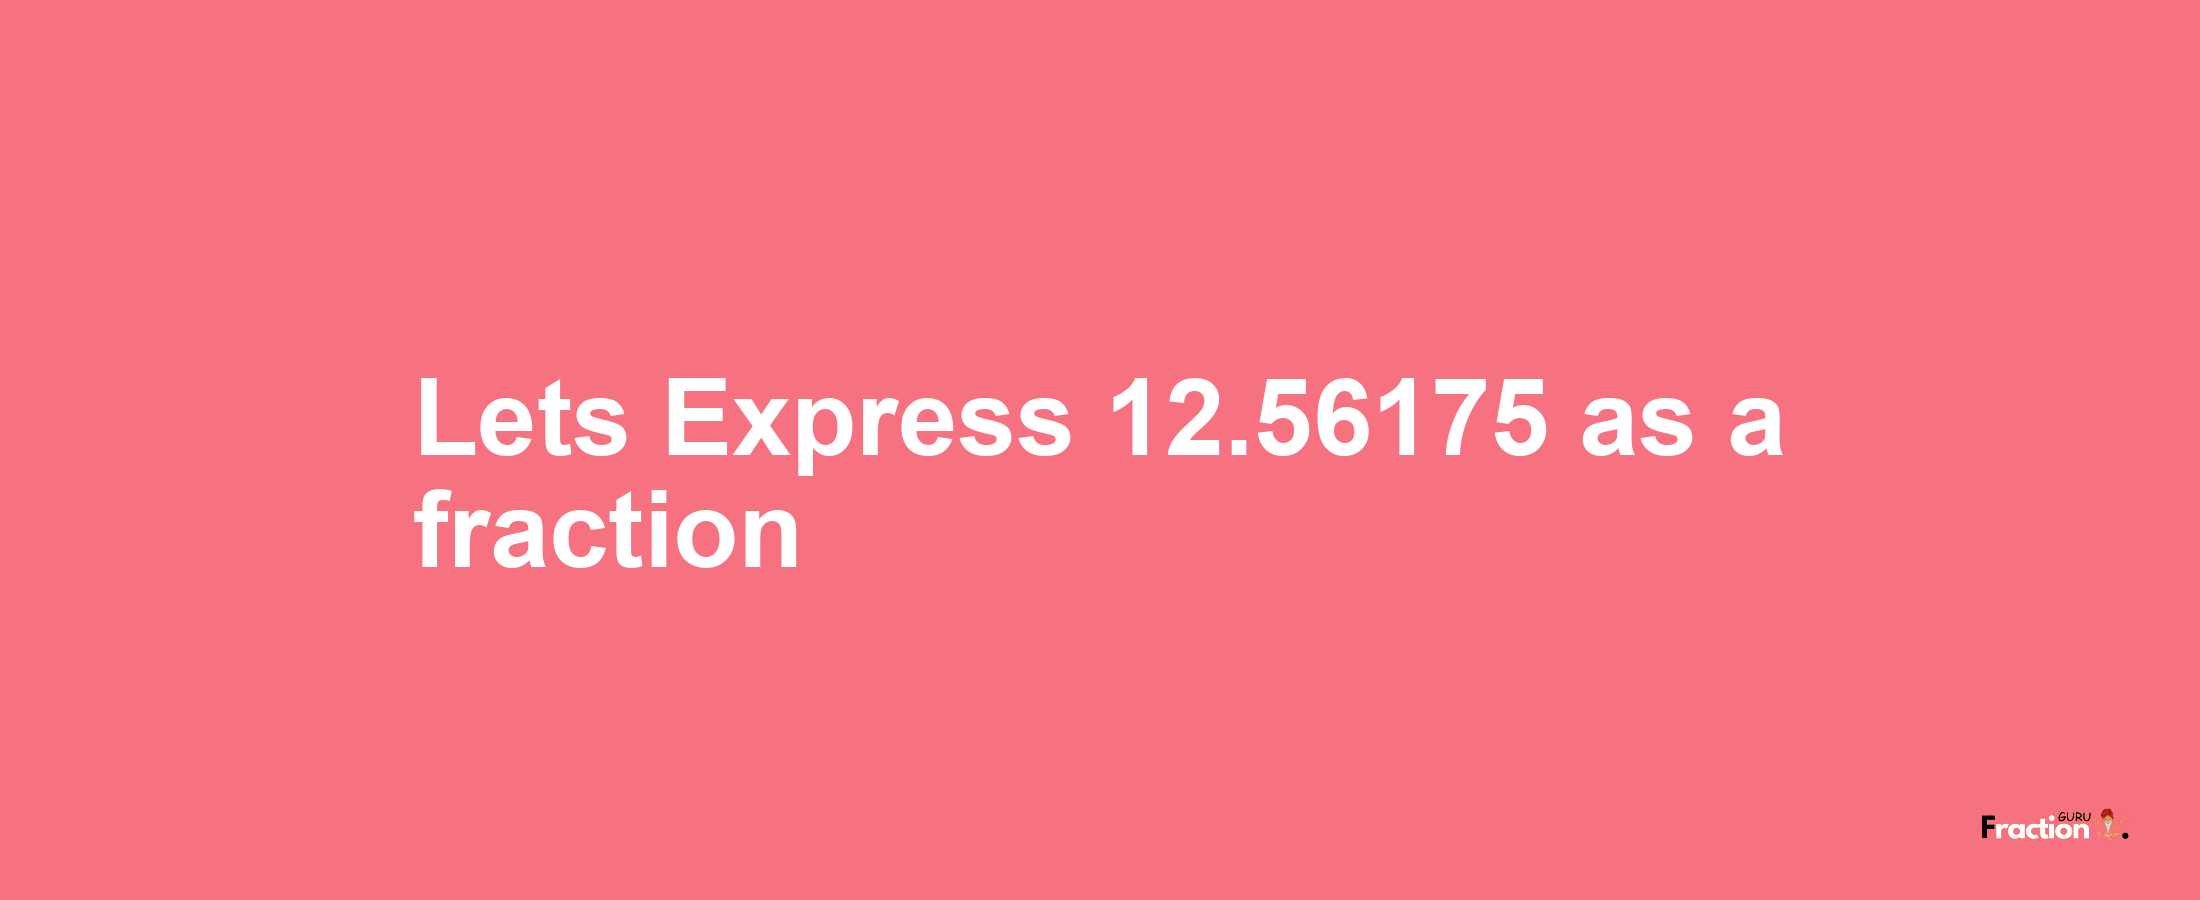 Lets Express 12.56175 as afraction